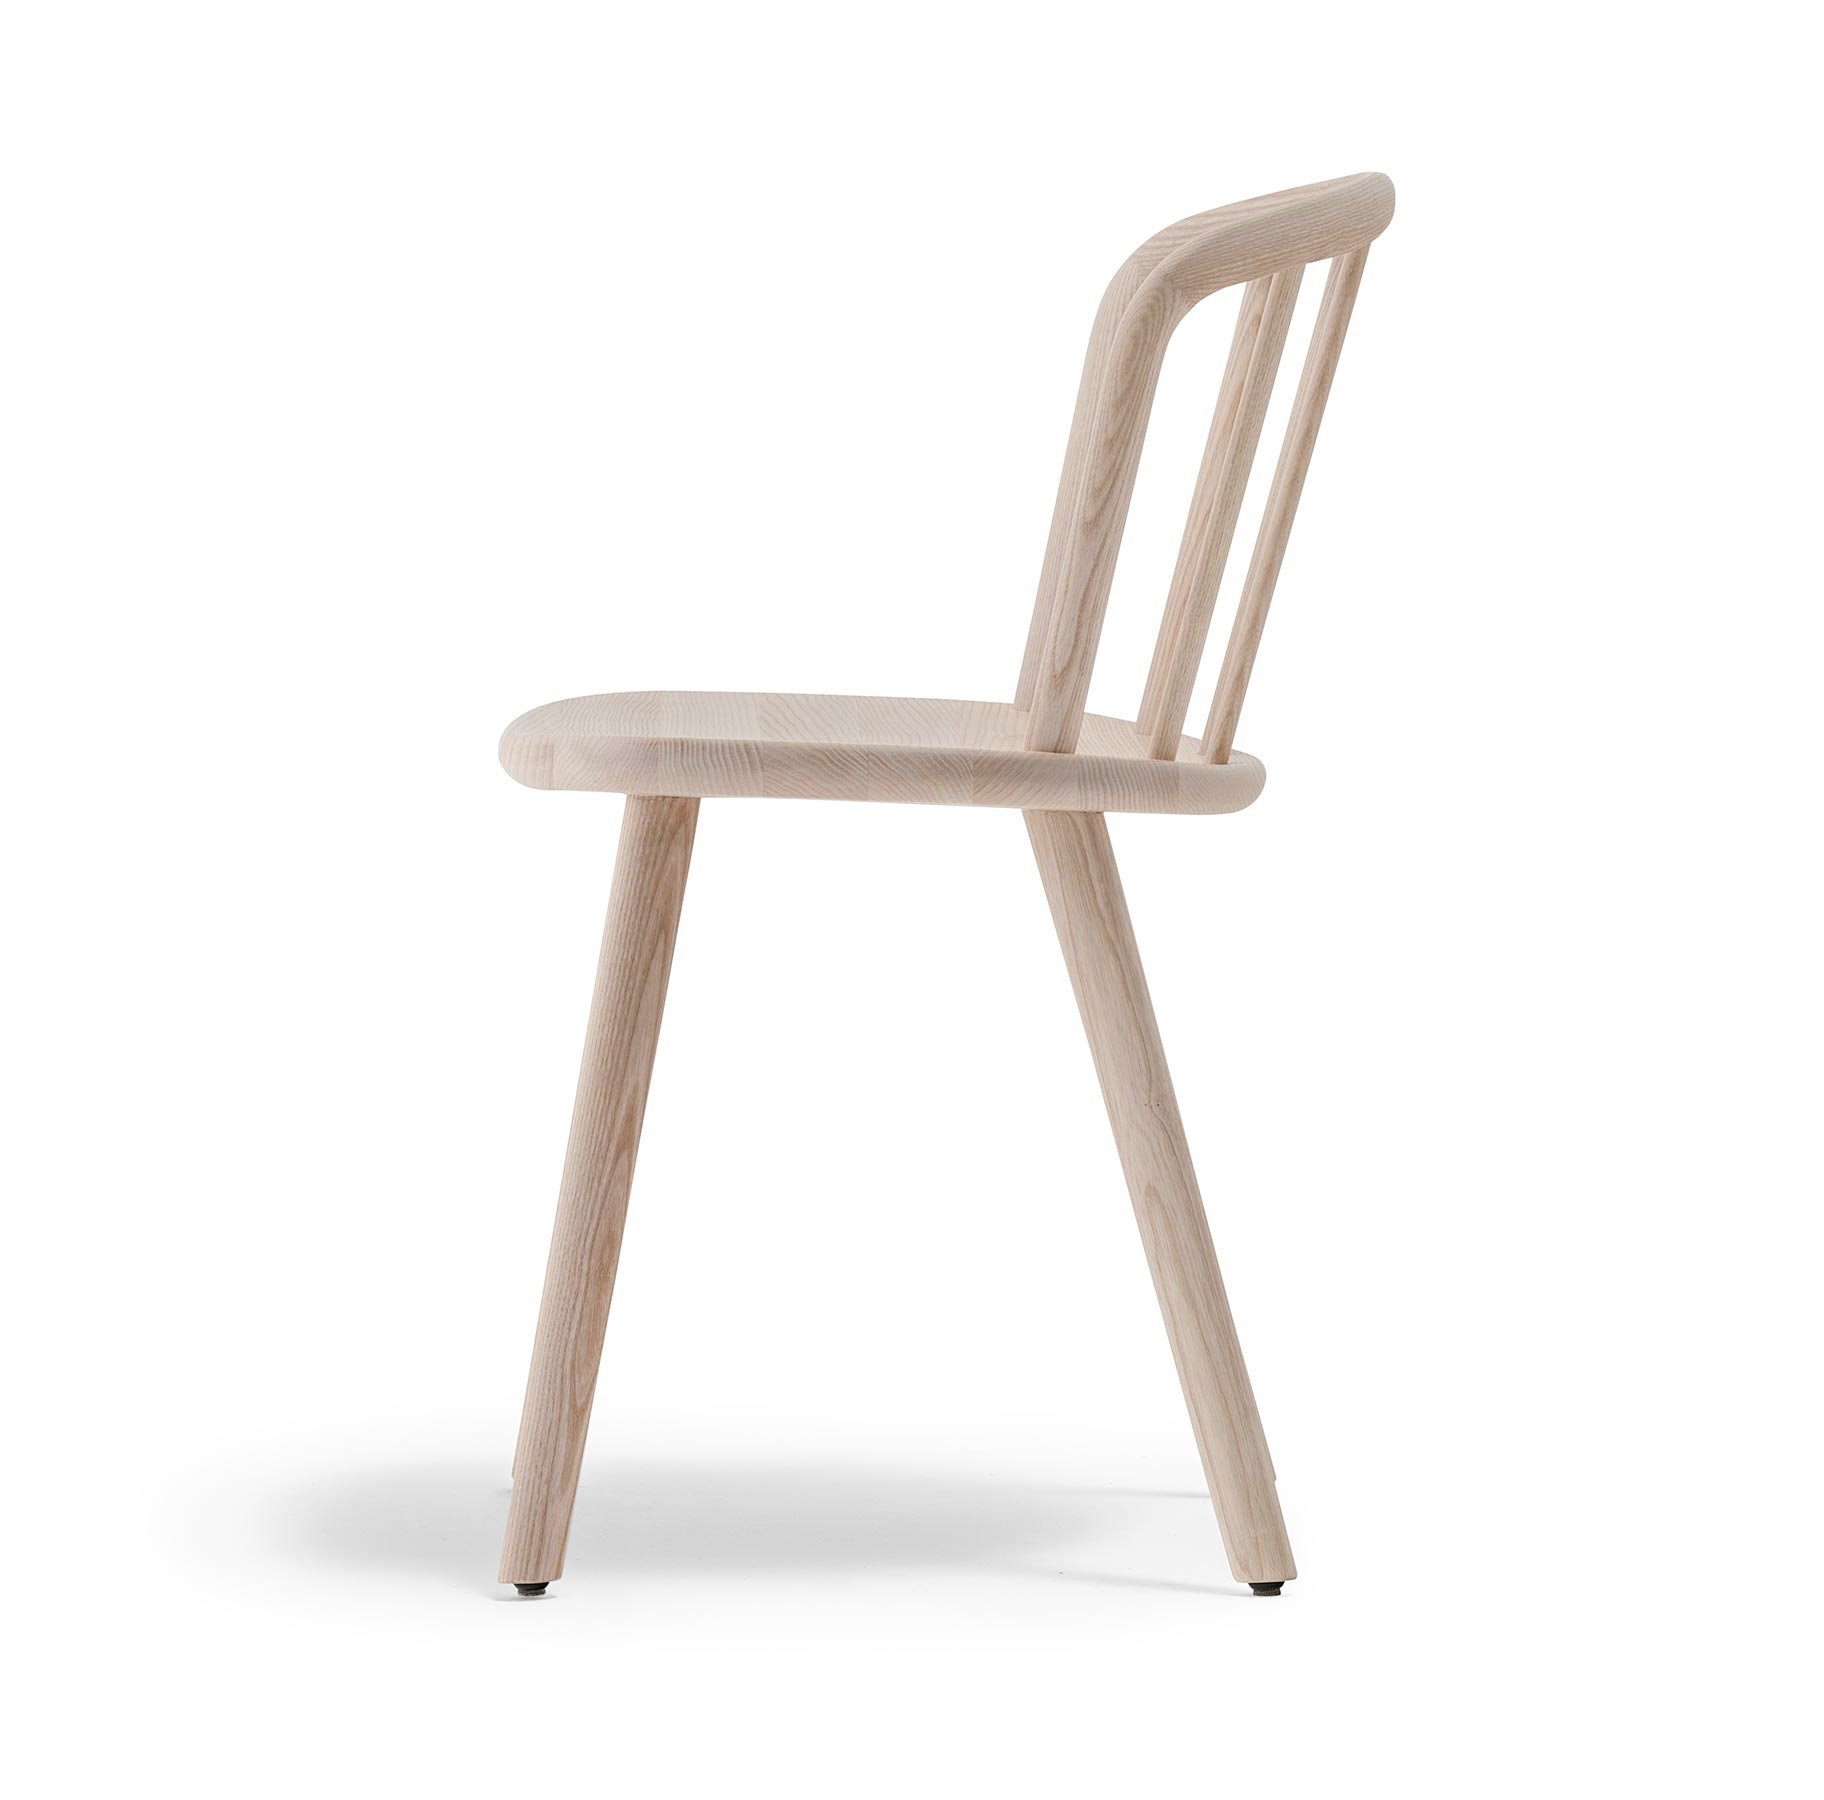 Nym 2830 chair from Pedrali, designed by CMP Design